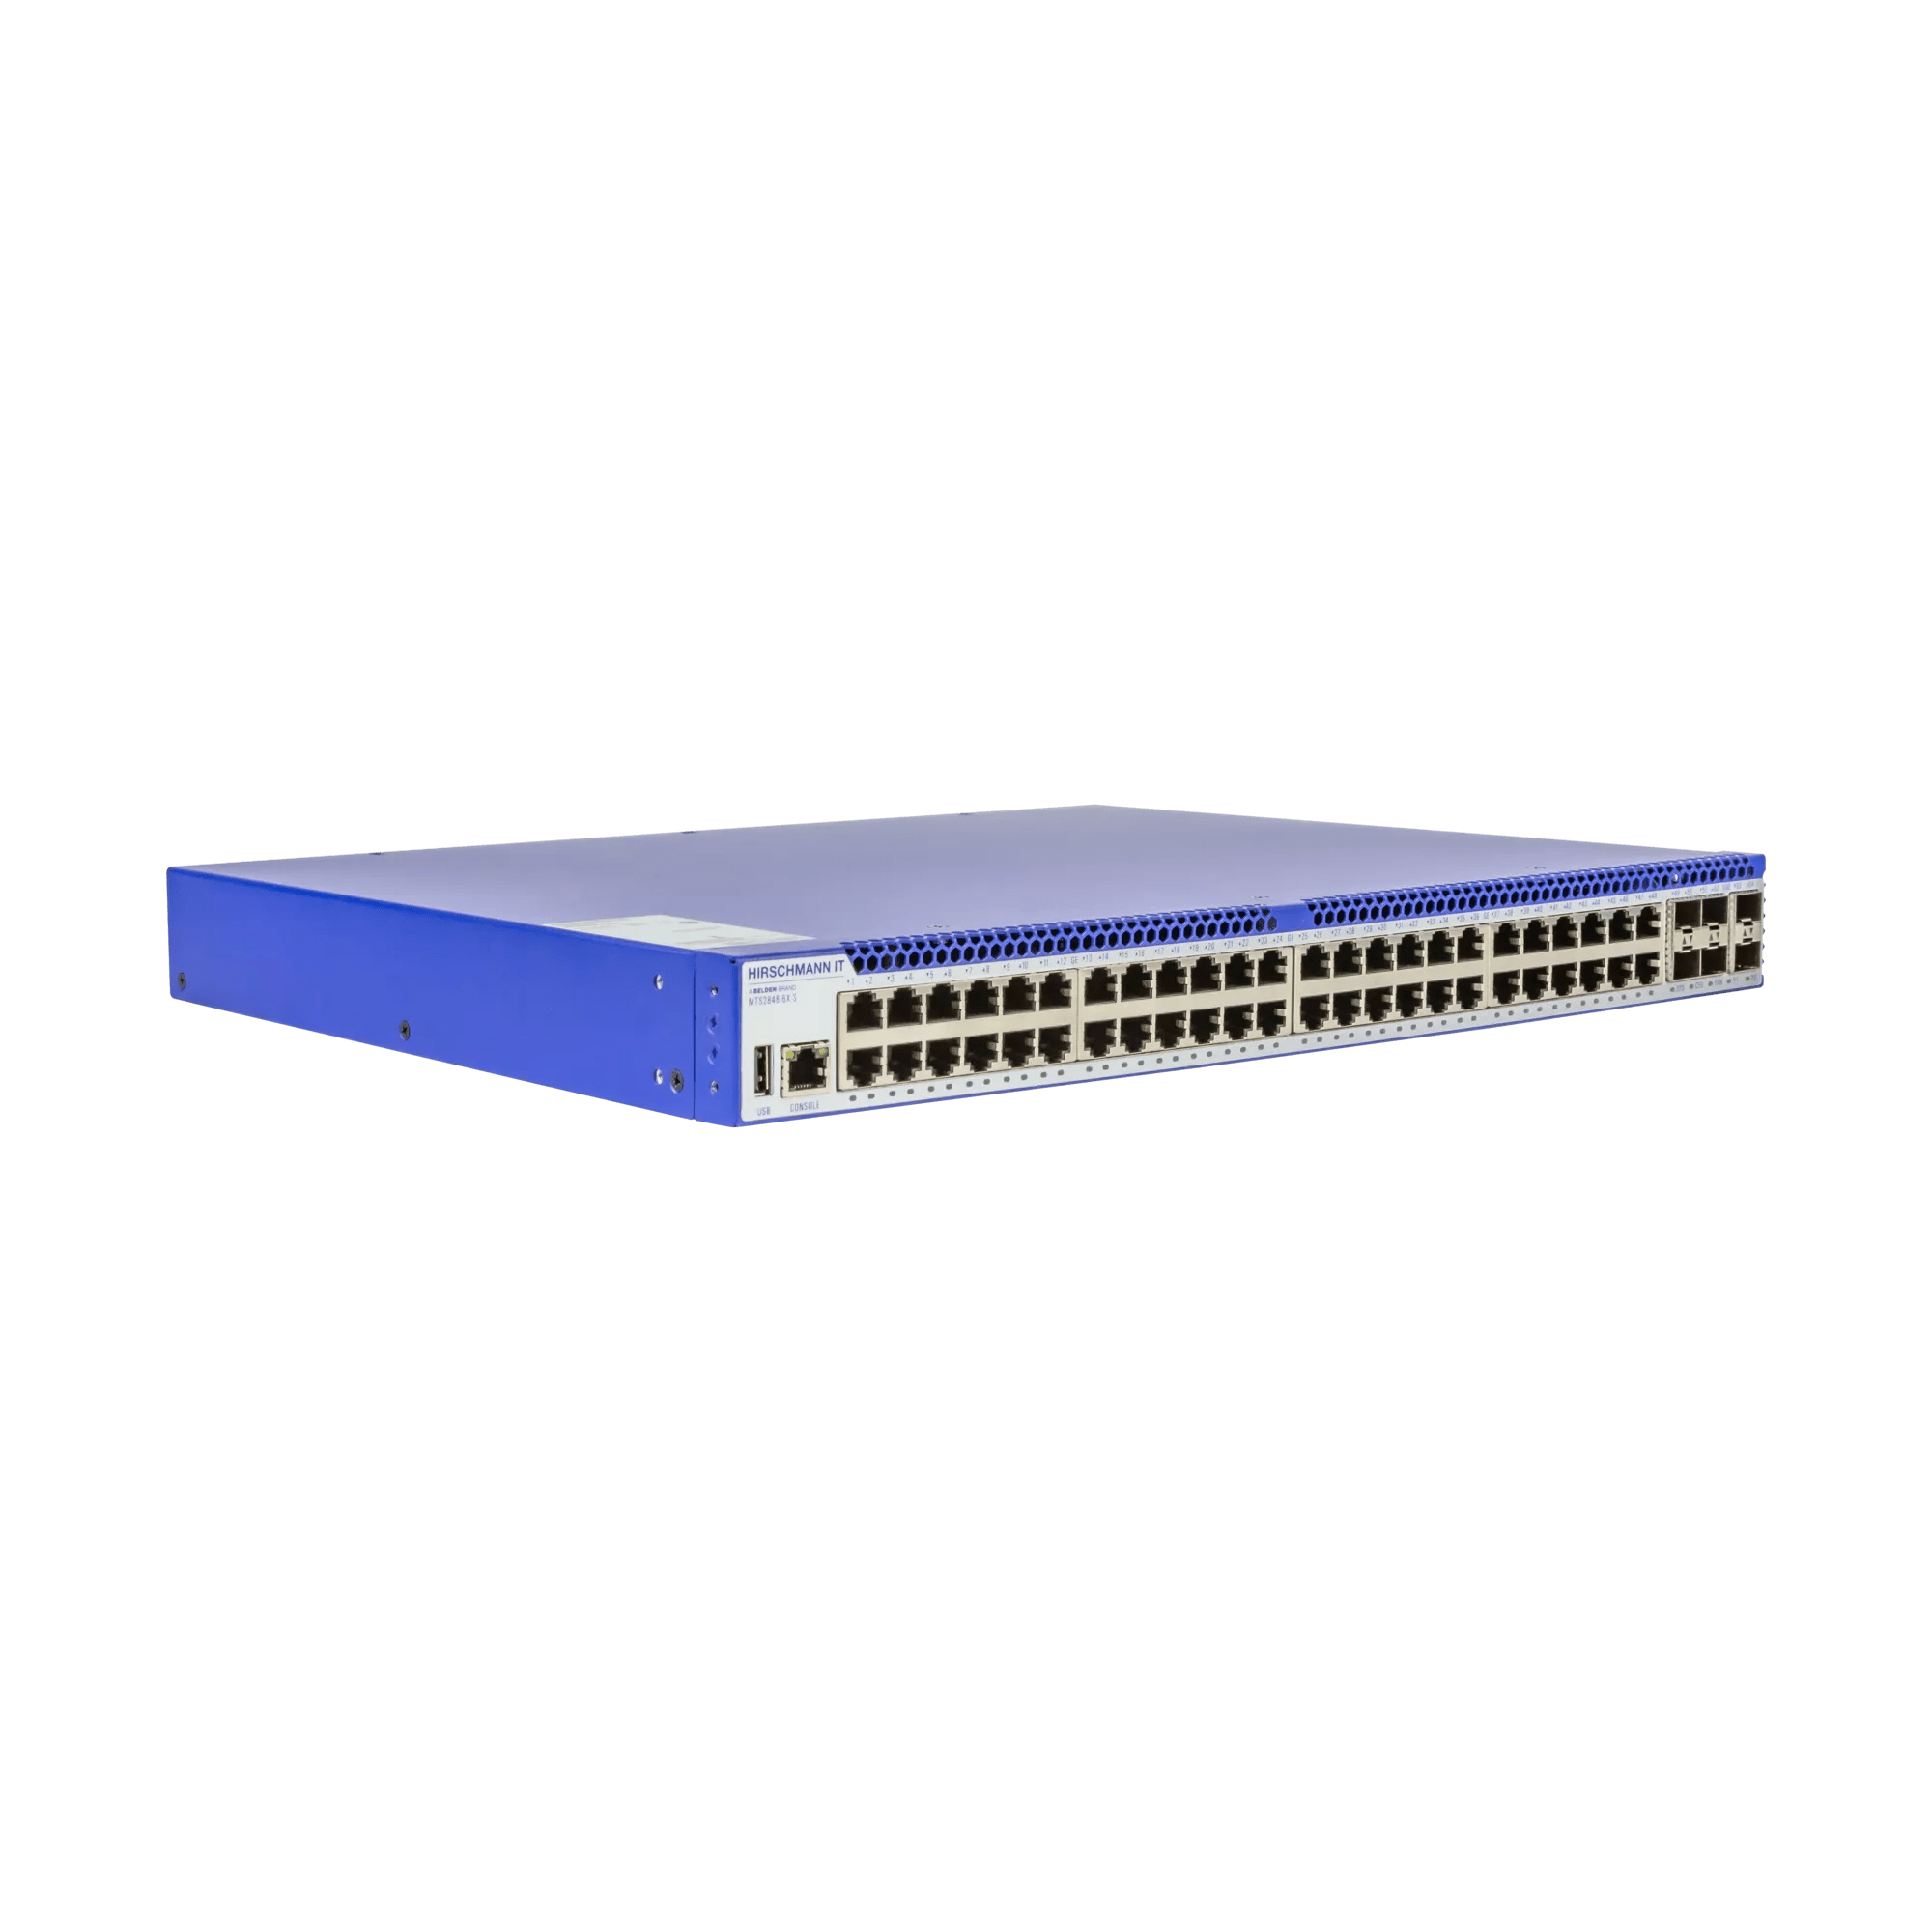 MAMMATHUS MTS2800 Managed Ethernet Switch, side view